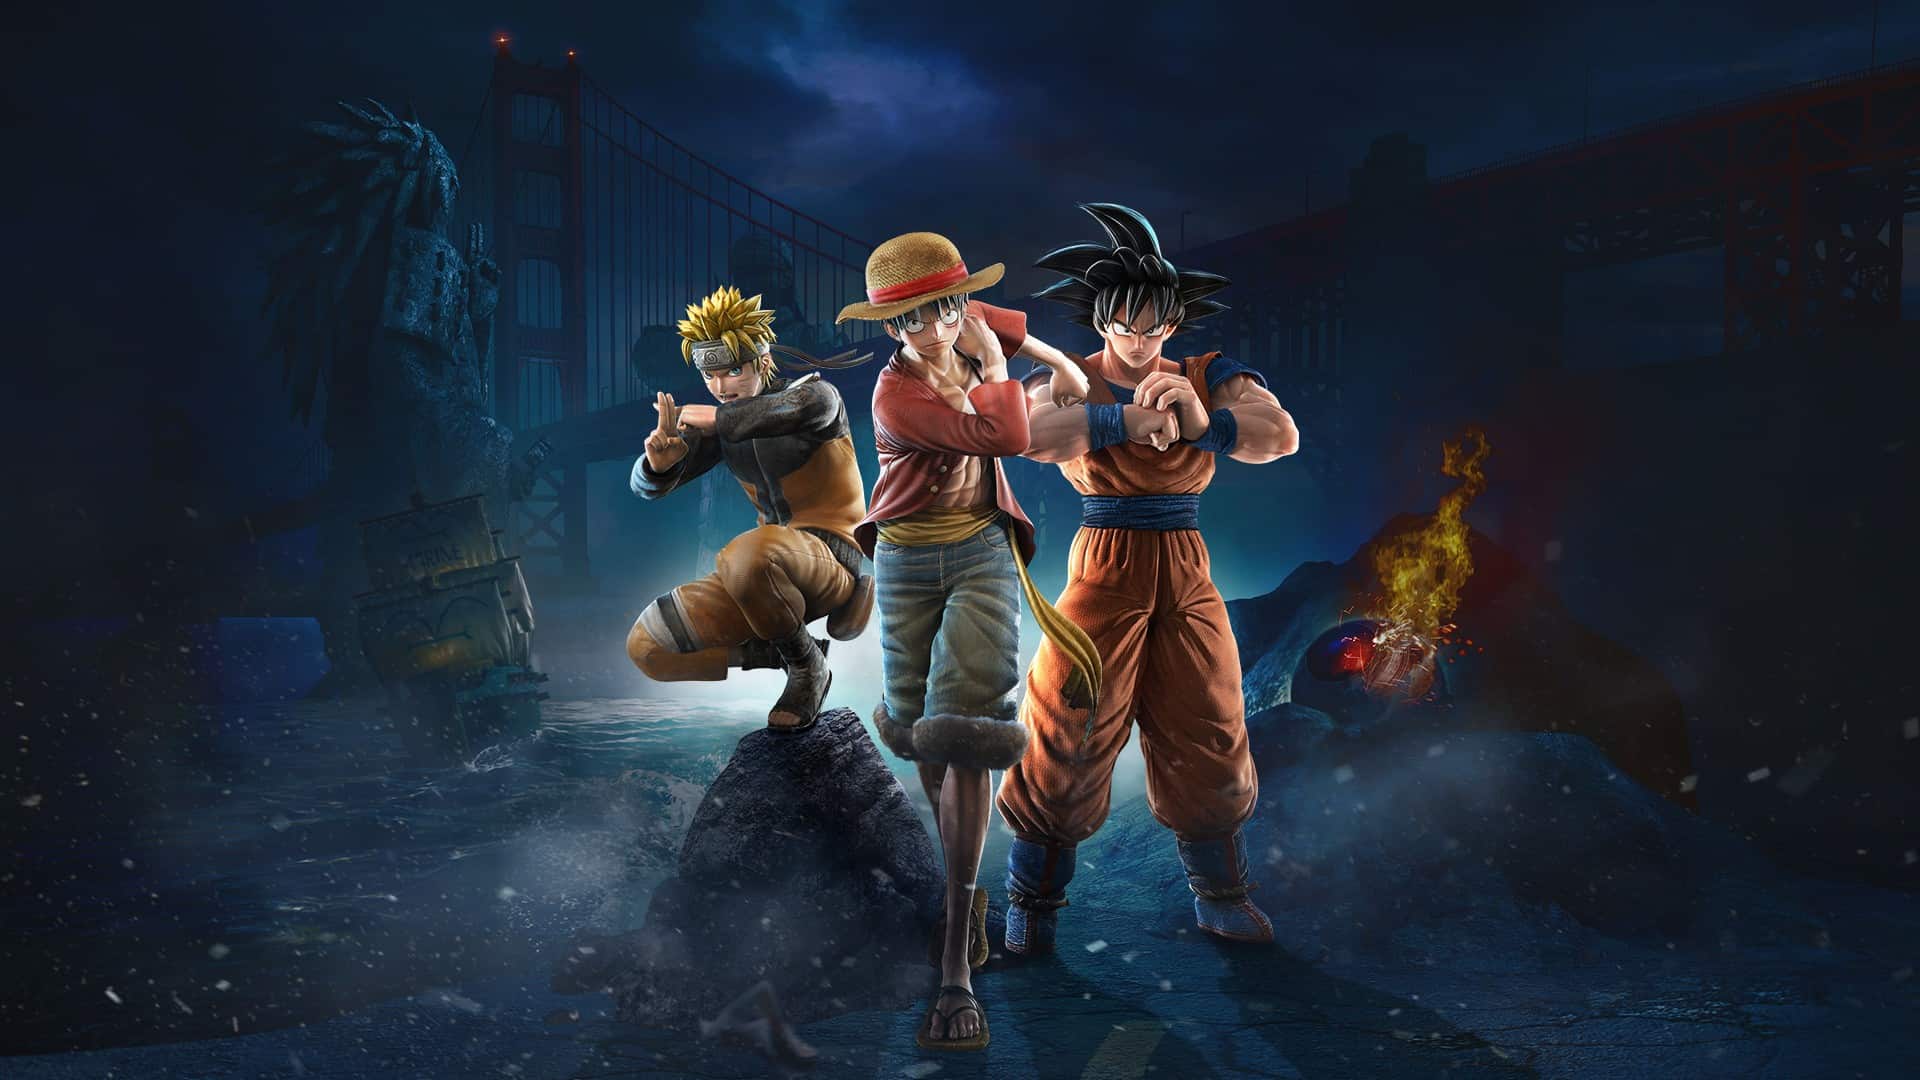 Official artwork for Jump Force